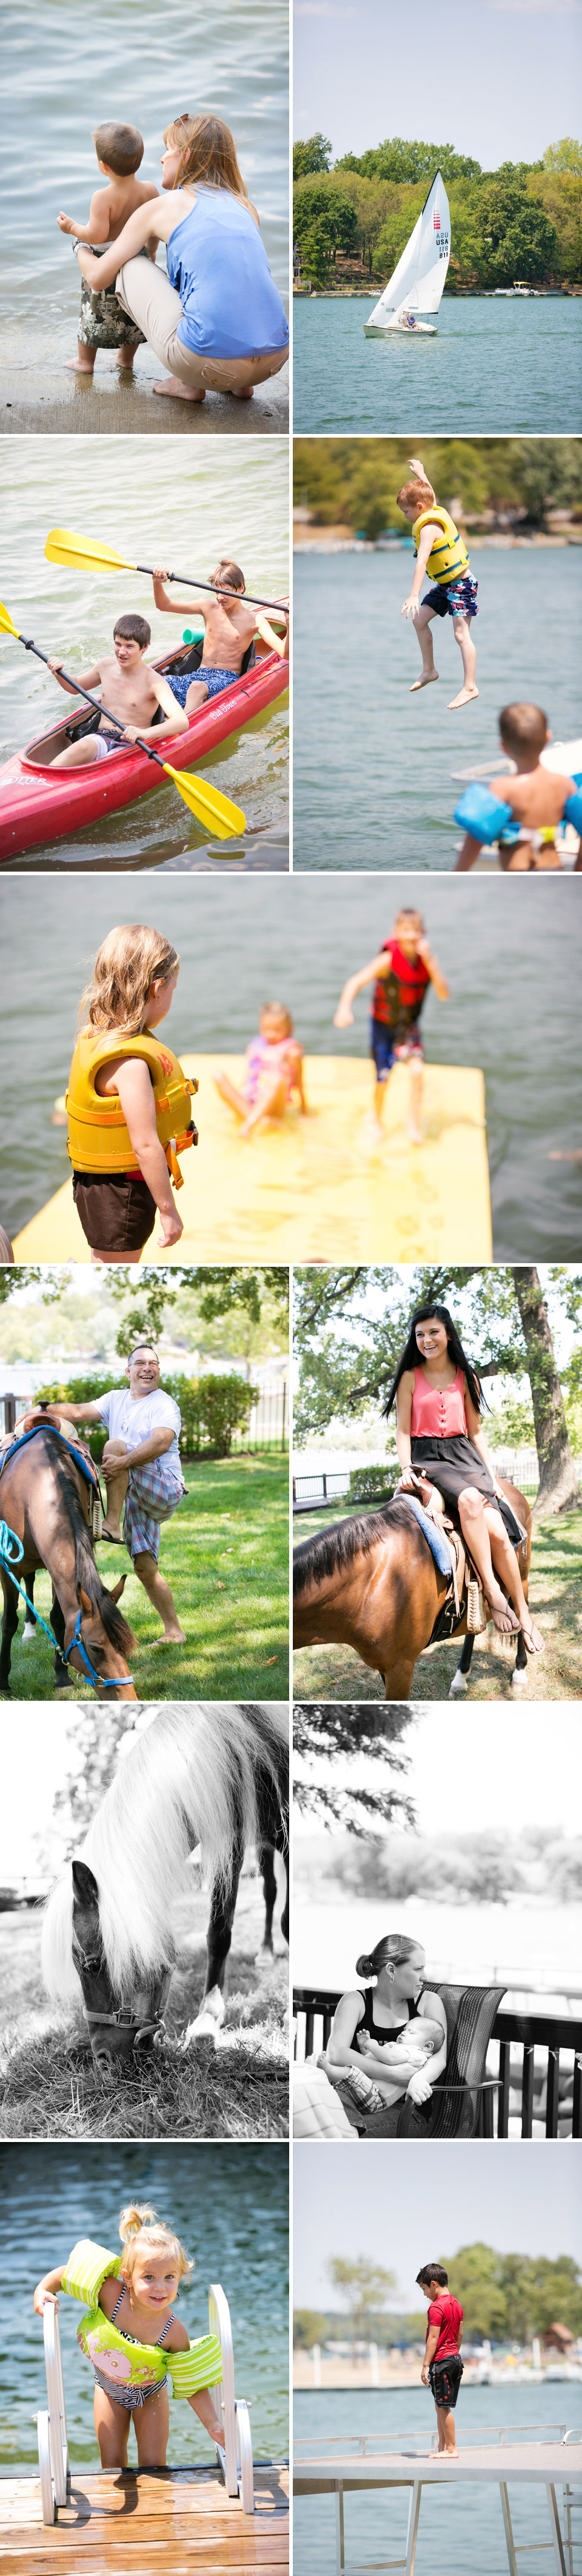 swimming, relaxing, family BBQ, Horse rides, Jana Marie Photos